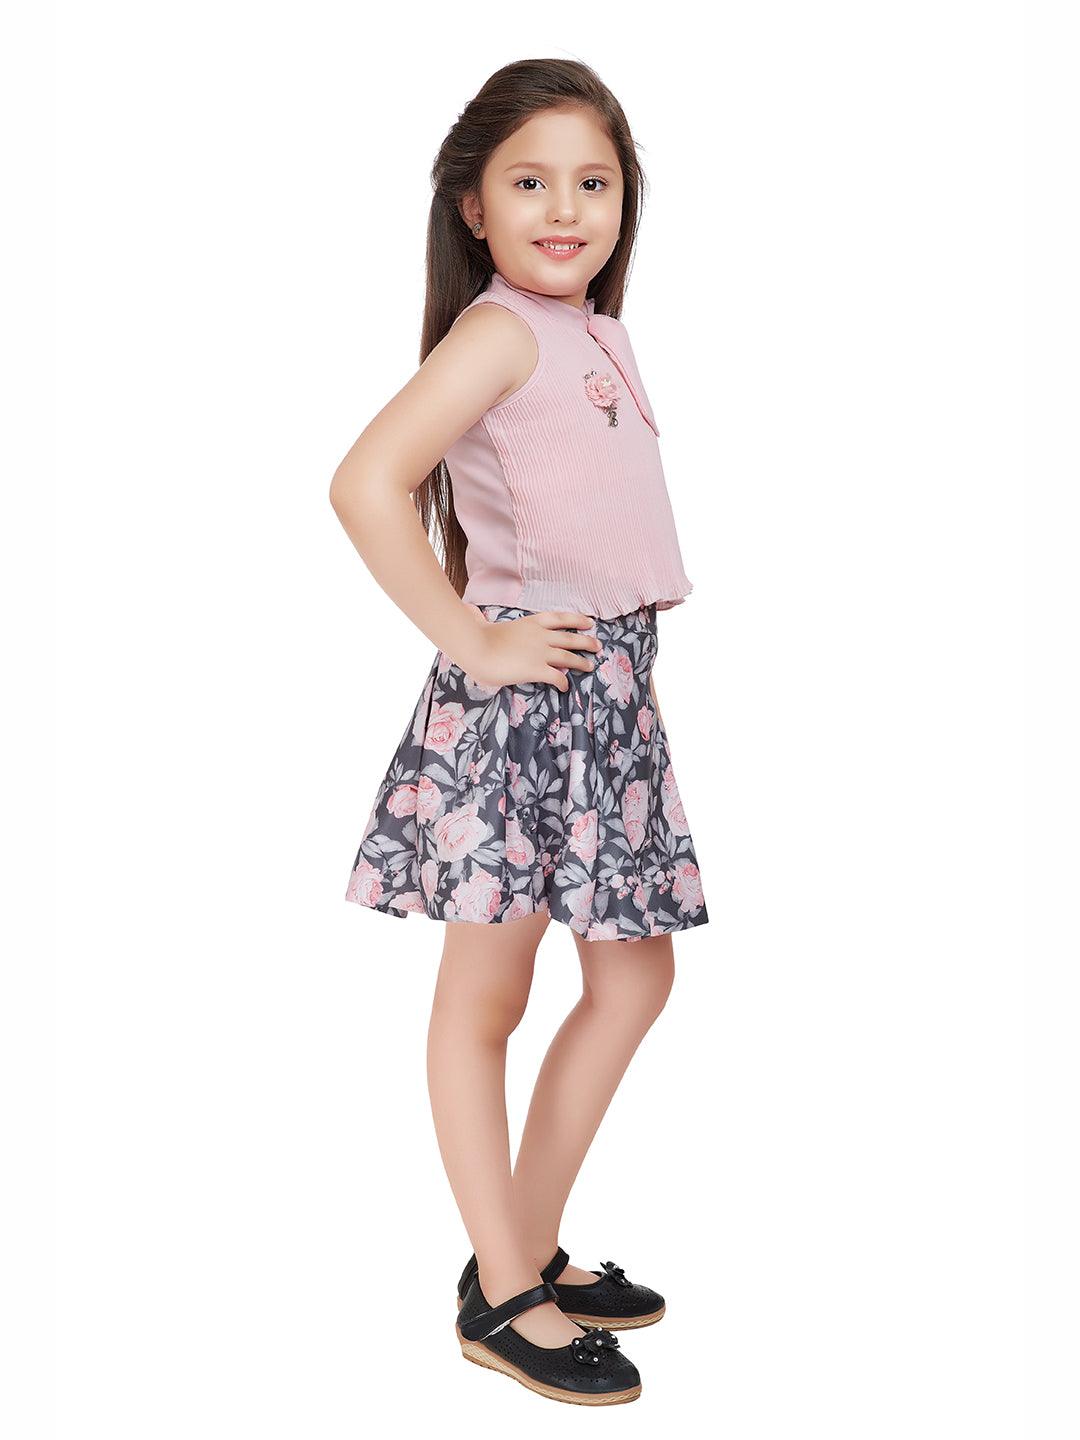 Pink  Colored Skirt Top set - 2073 Pink - TINY BABY INDIA shop.tinybaby.in